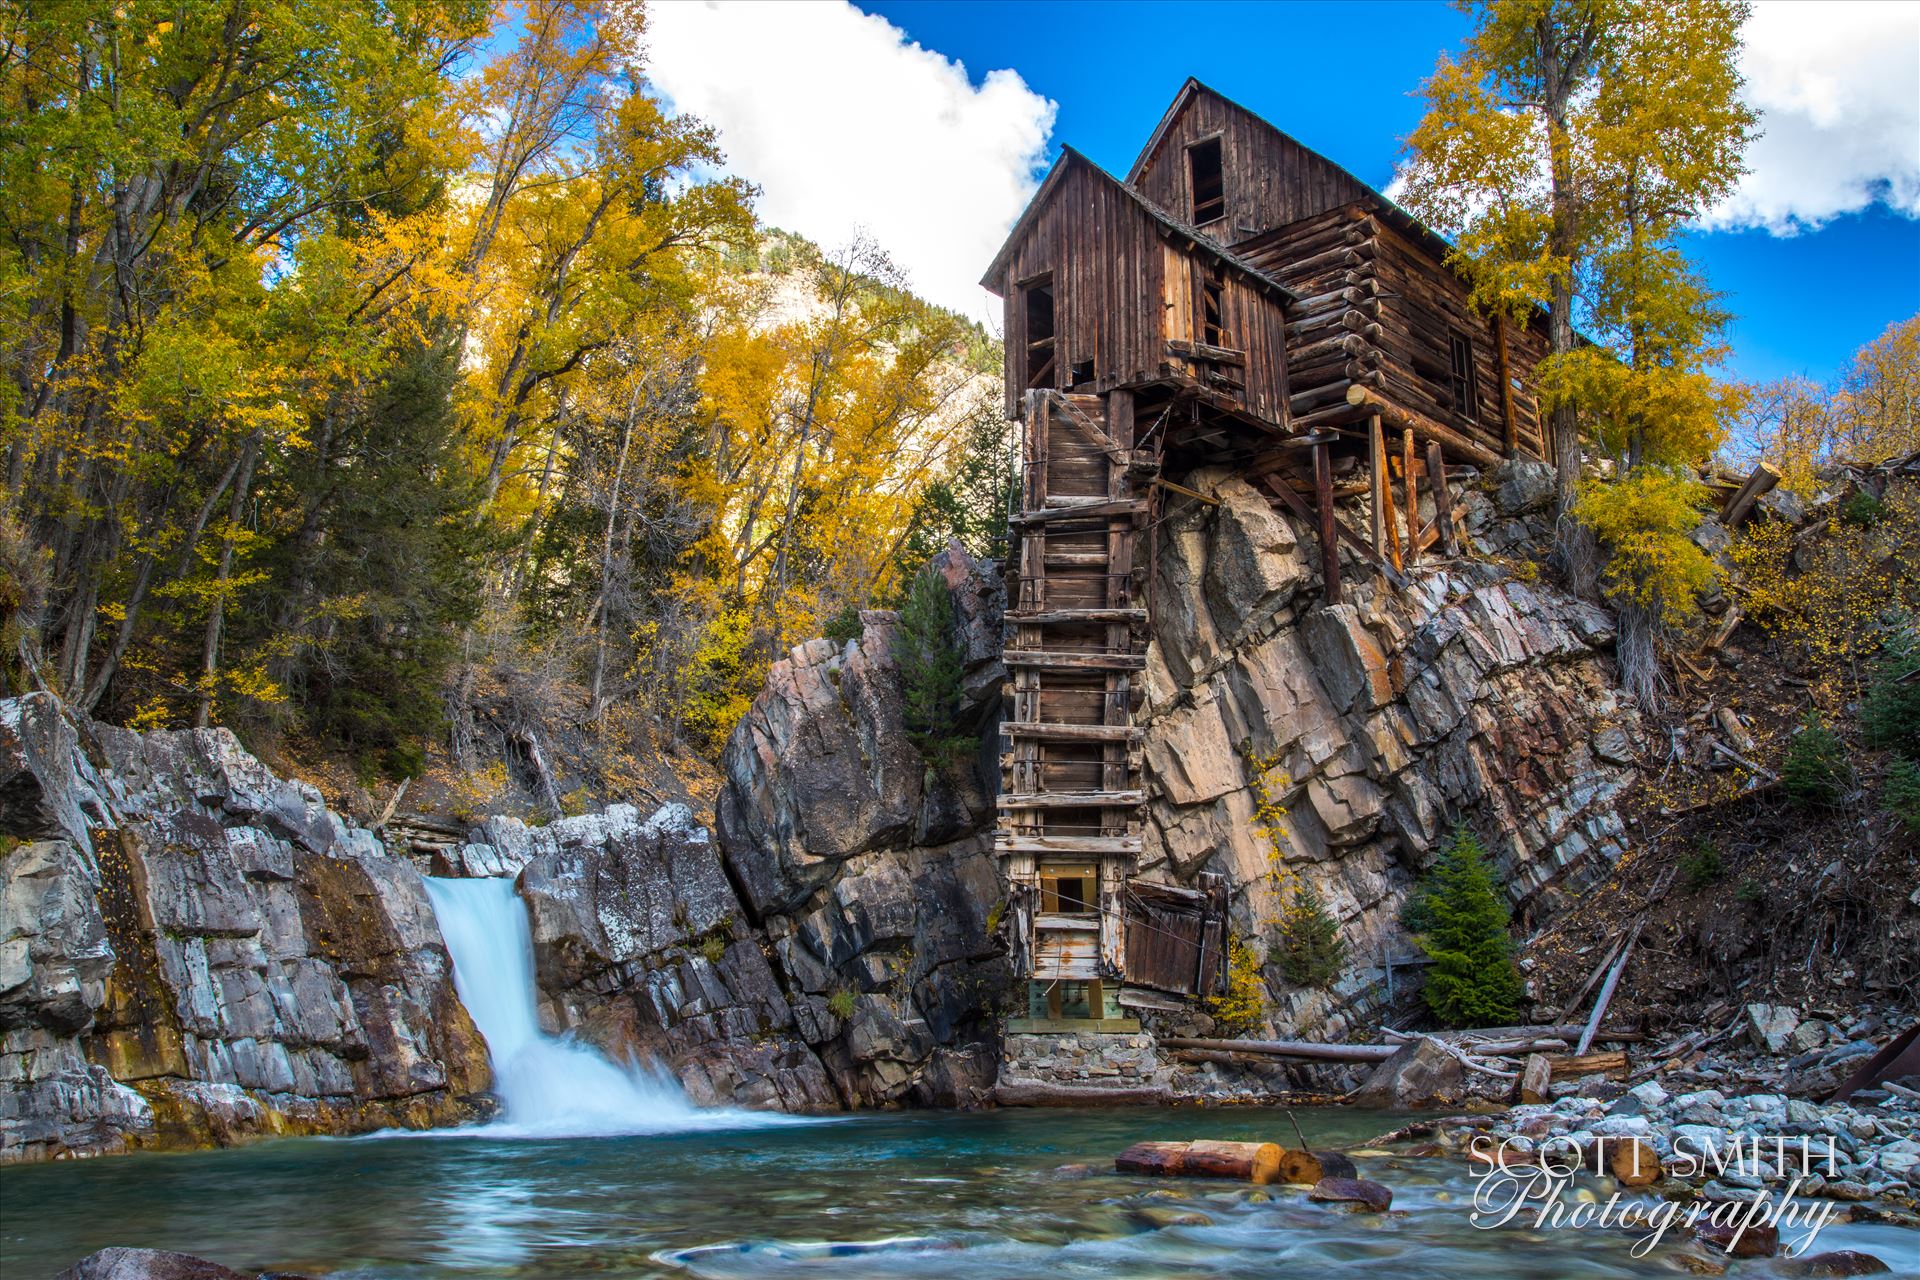 Crystal Mill, Colorado 07 The Crystal Mill, or the Old Mill is an 1892 wooden powerhouse located on an outcrop above the Crystal River in Crystal, Colorado by Scott Smith Photos